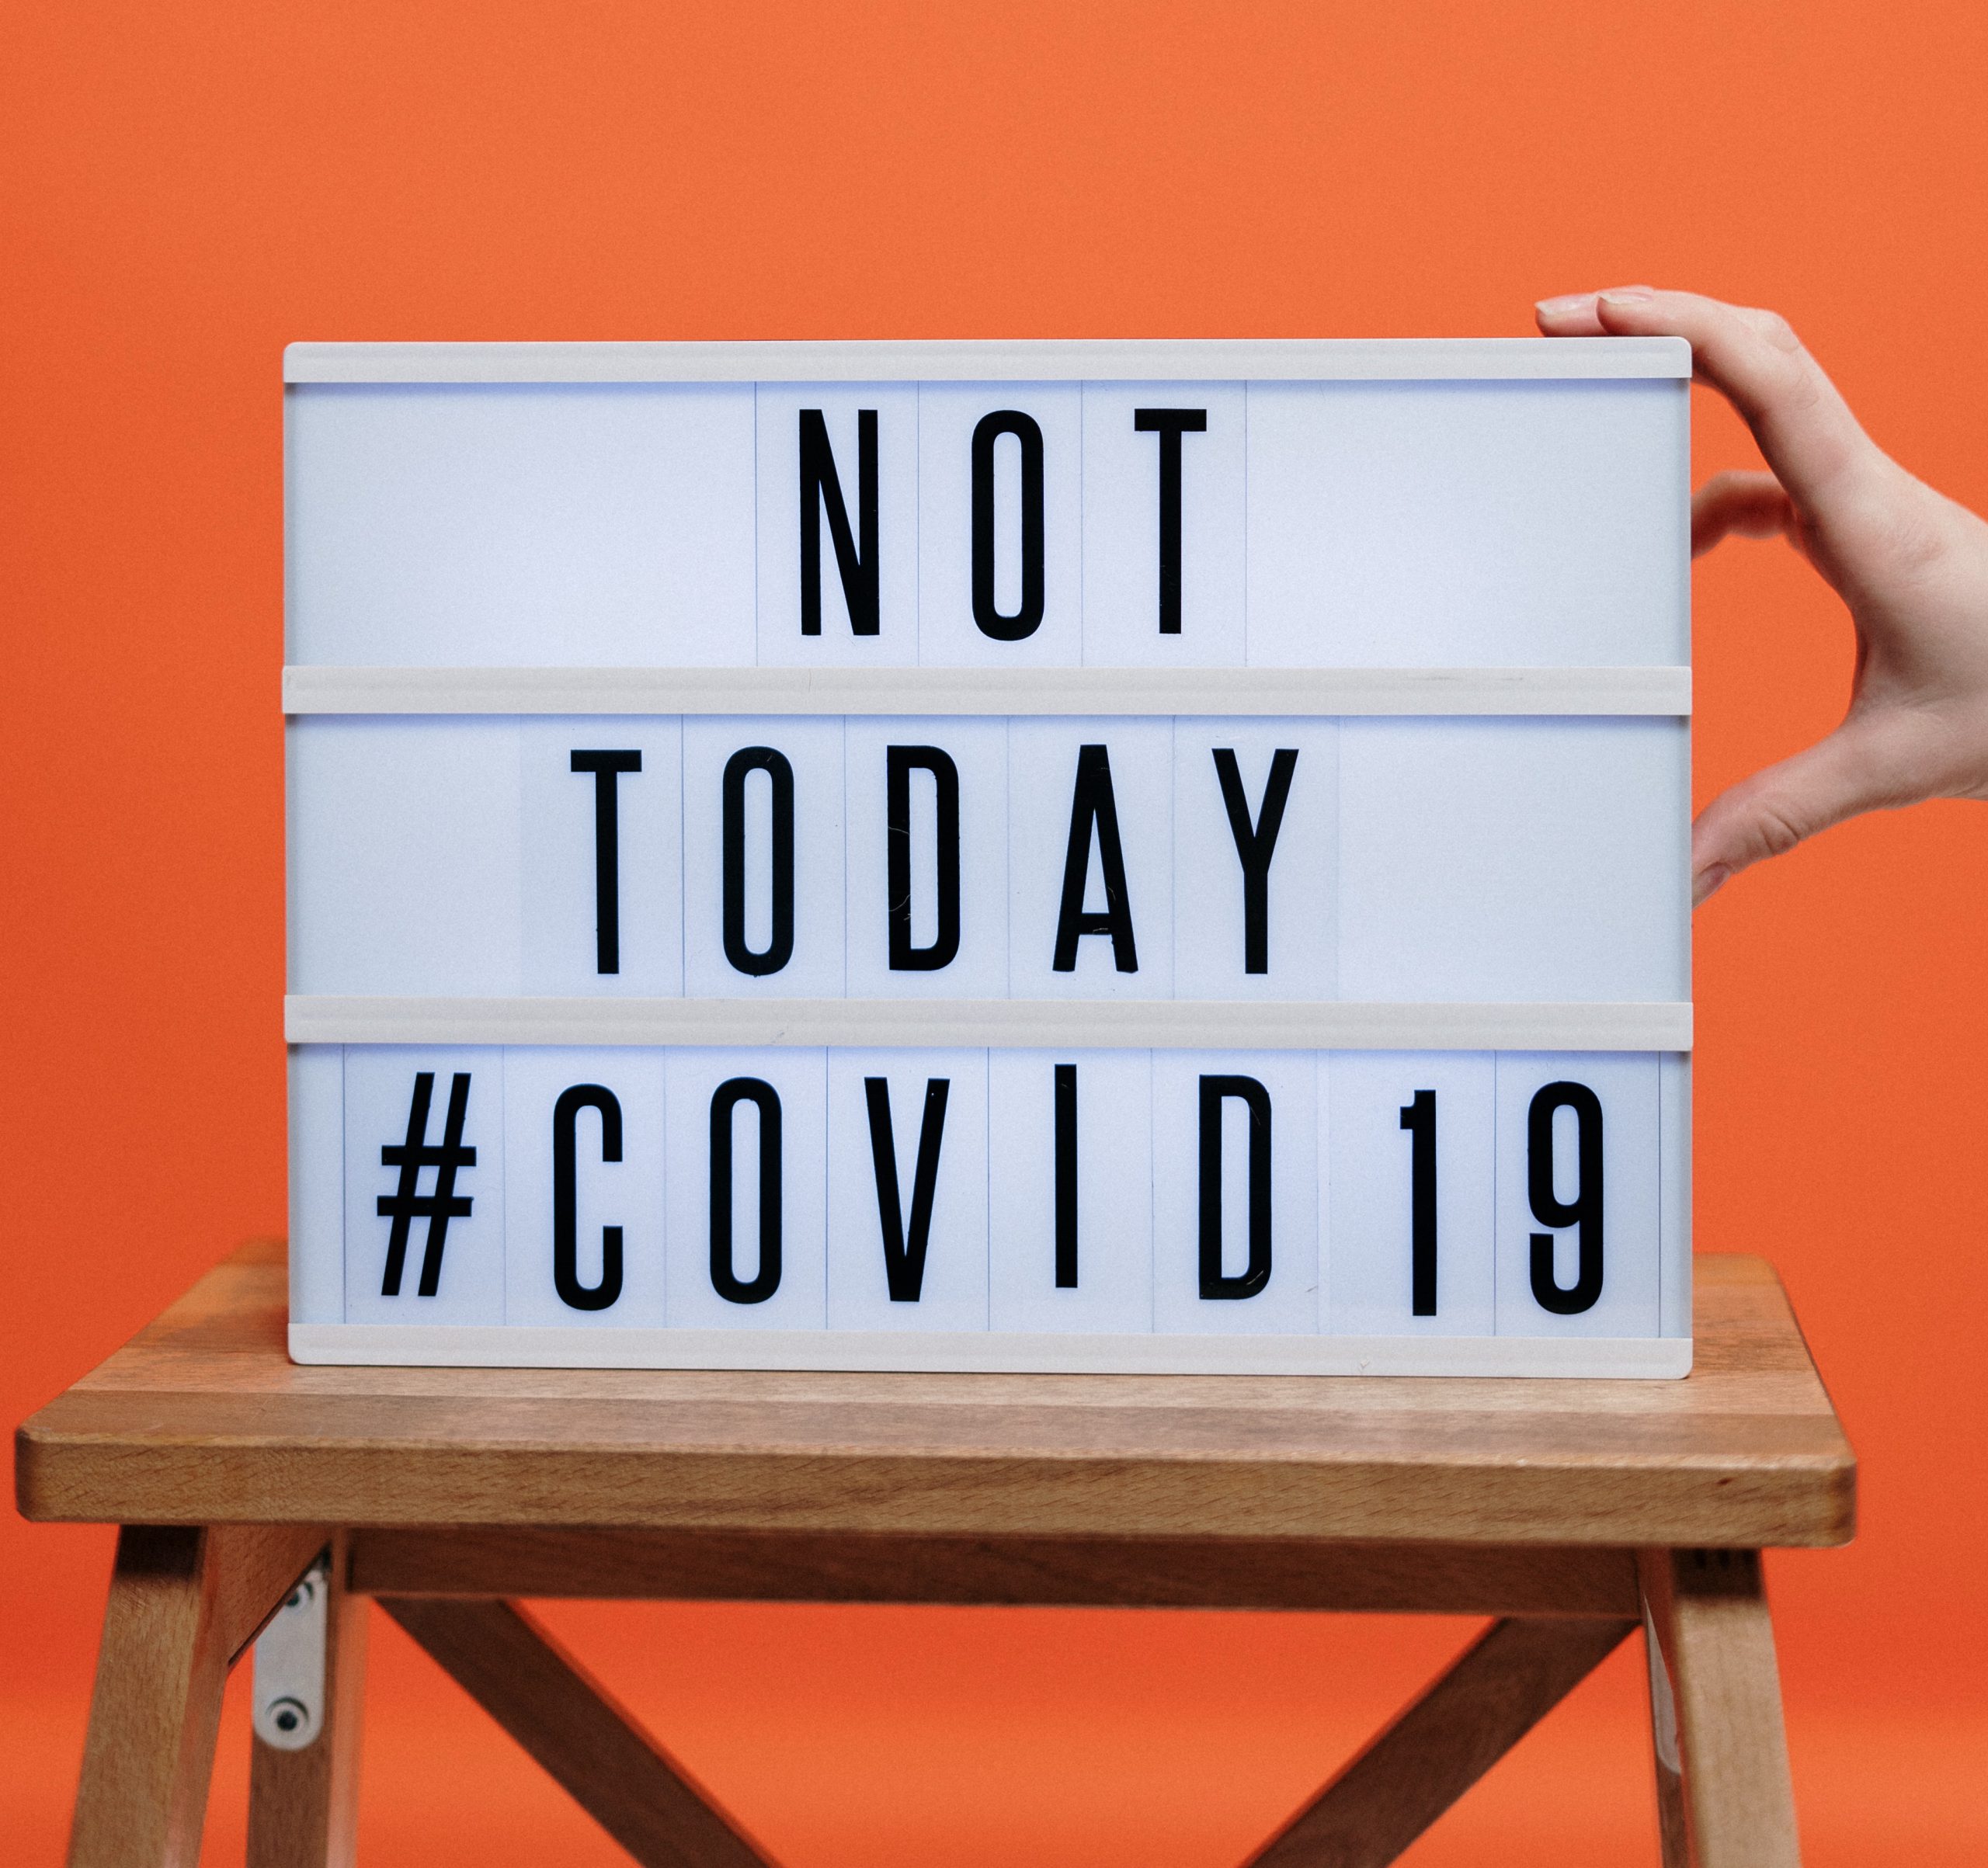 5 ways to stay positive and focused during COVID-19